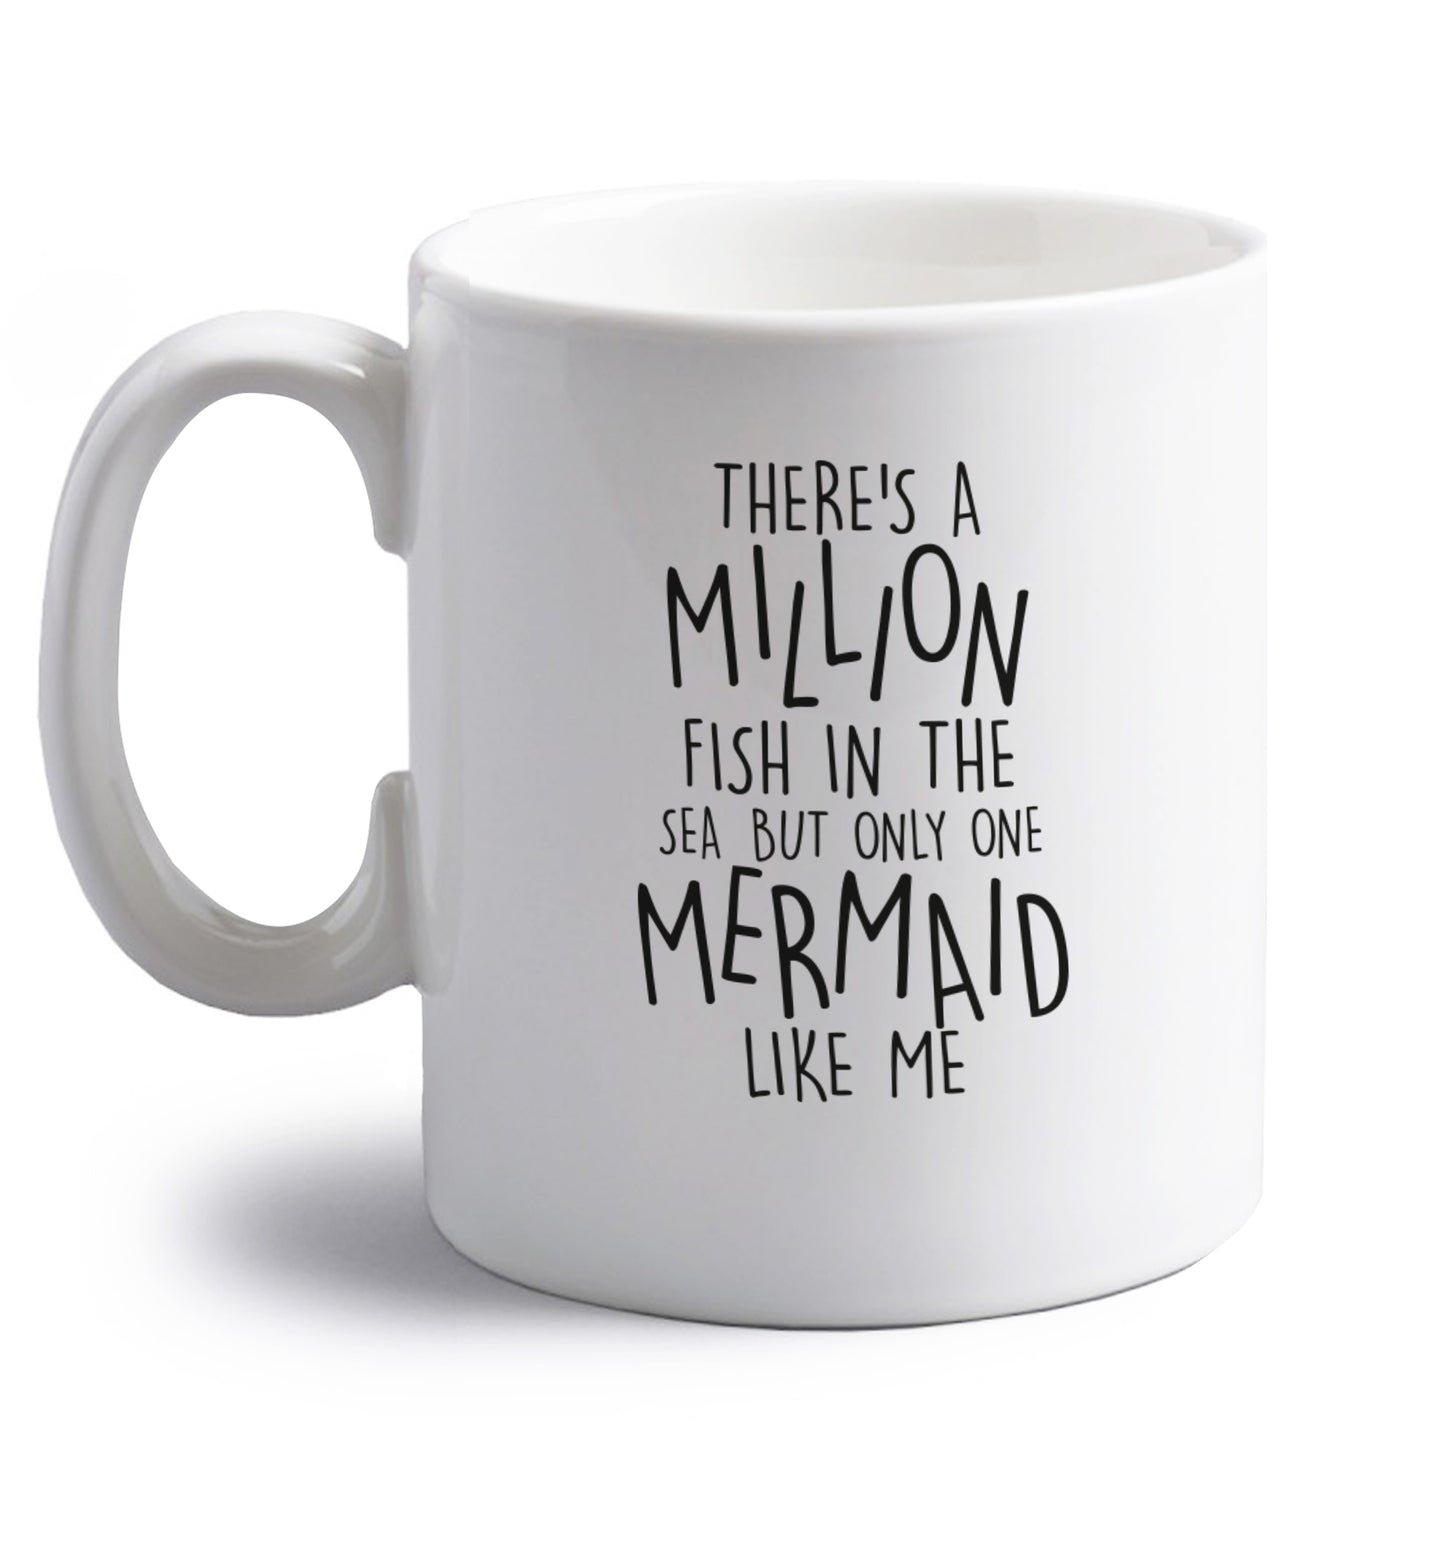 There's a million fish in the sea but only one mermaid like me right handed white ceramic mug 